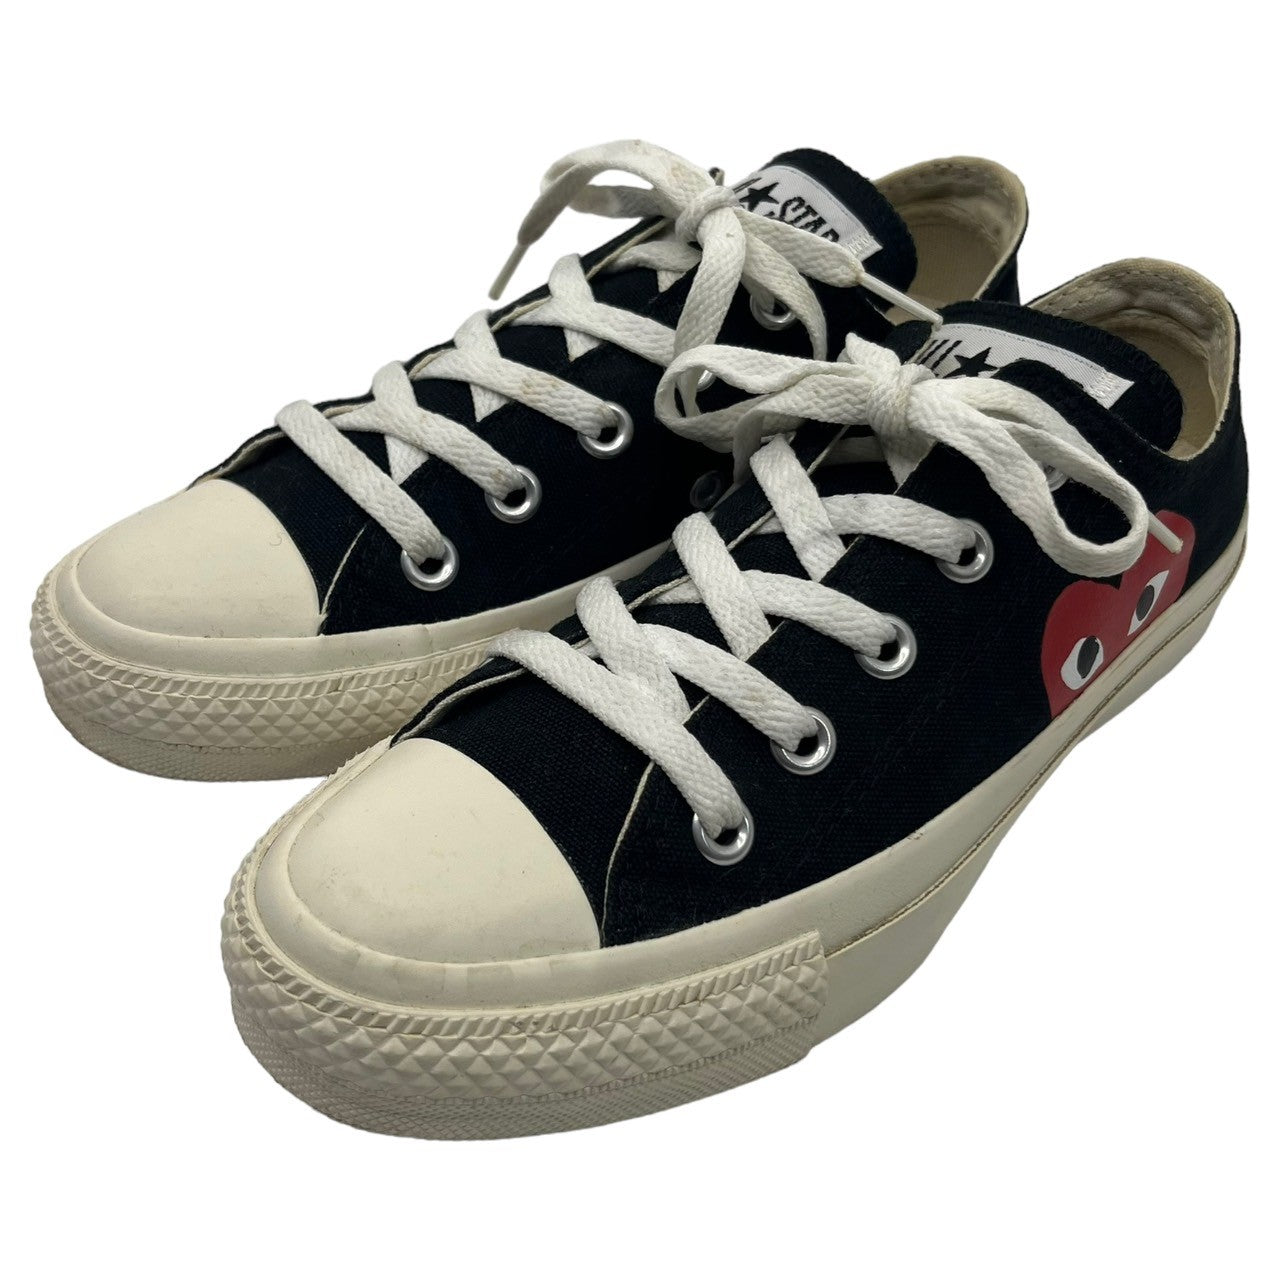 PLAY COMME des GARCONS×CONVERSE(プレイコムデギャルソン×コンバース) All Star OX PCDG 